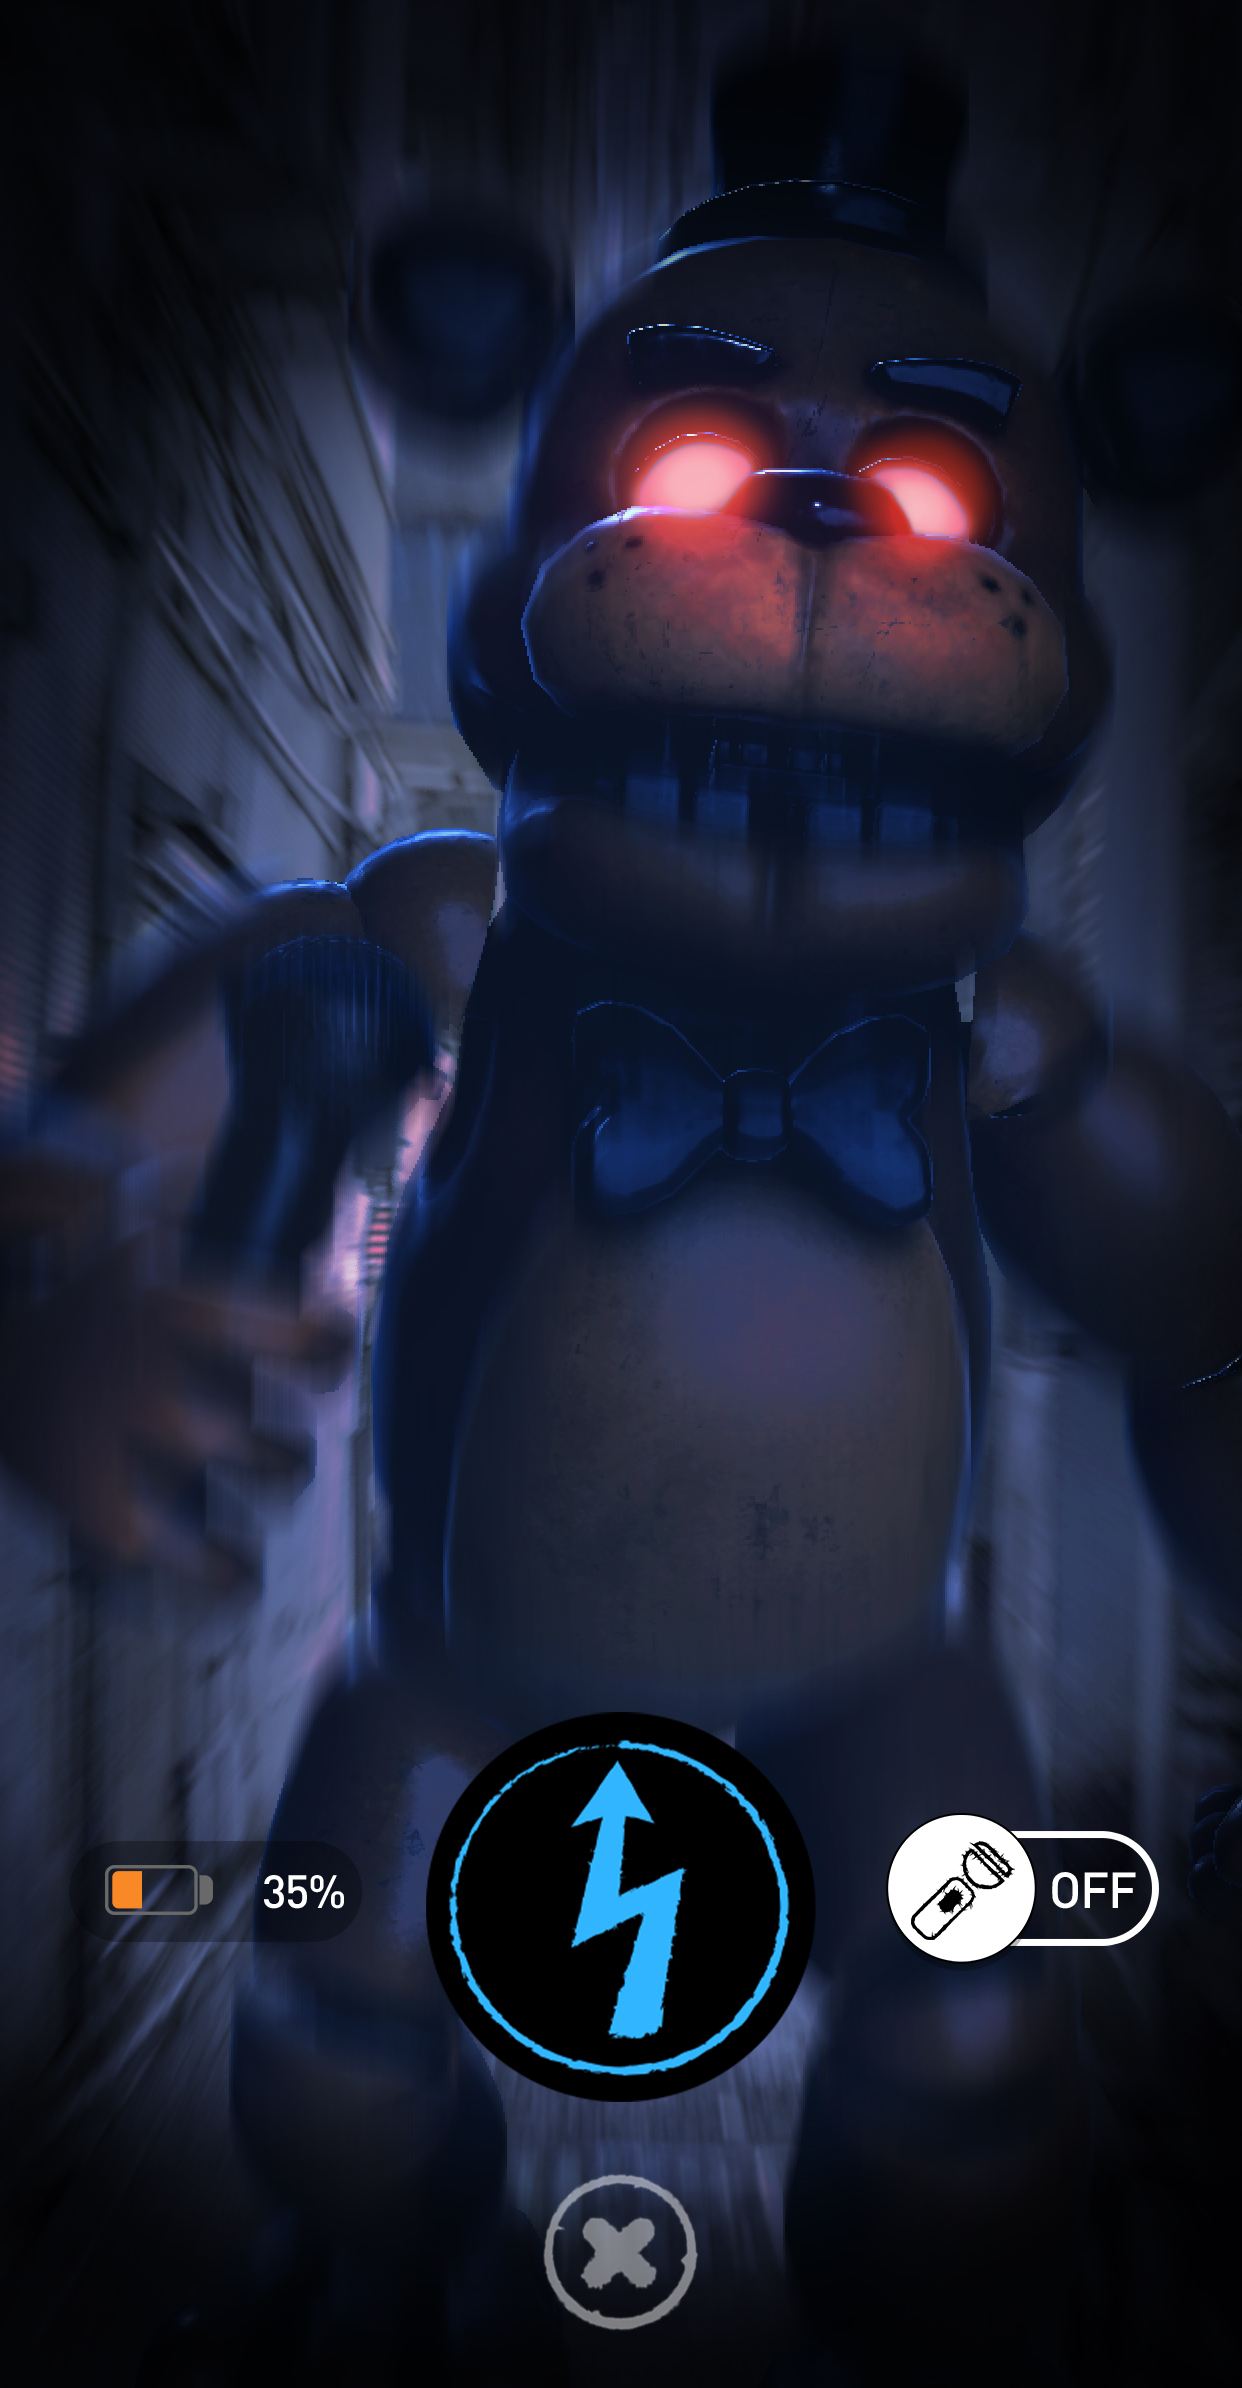 Five Nights At Freddy's AR Brings The Terror Of Creepy Animatronics To Your  Living Room